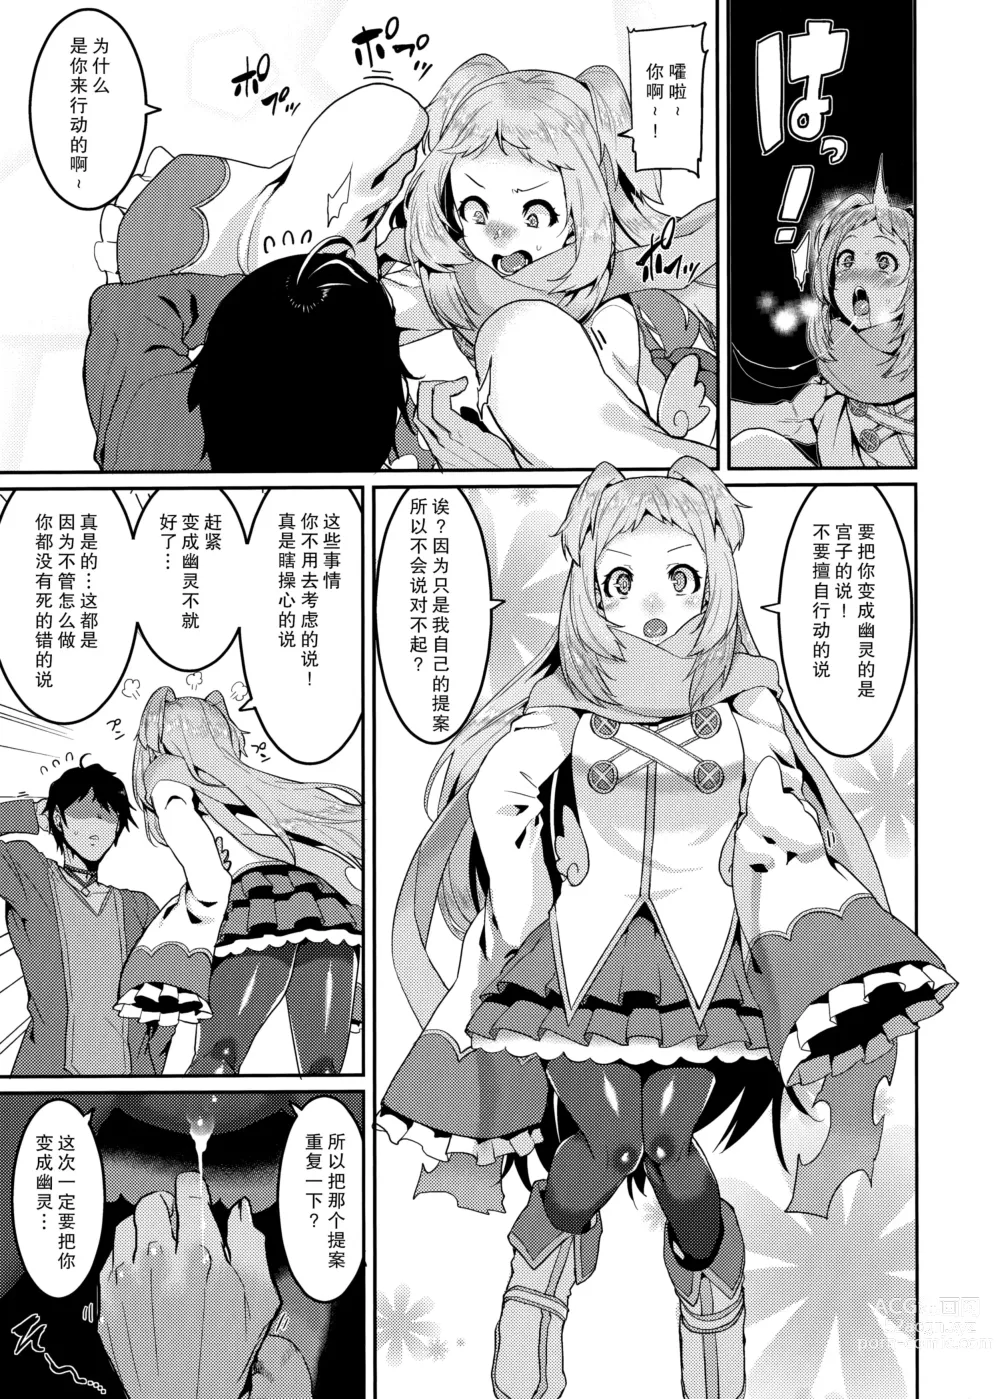 Page 7 of doujinshi Pudding Switch (decensored)